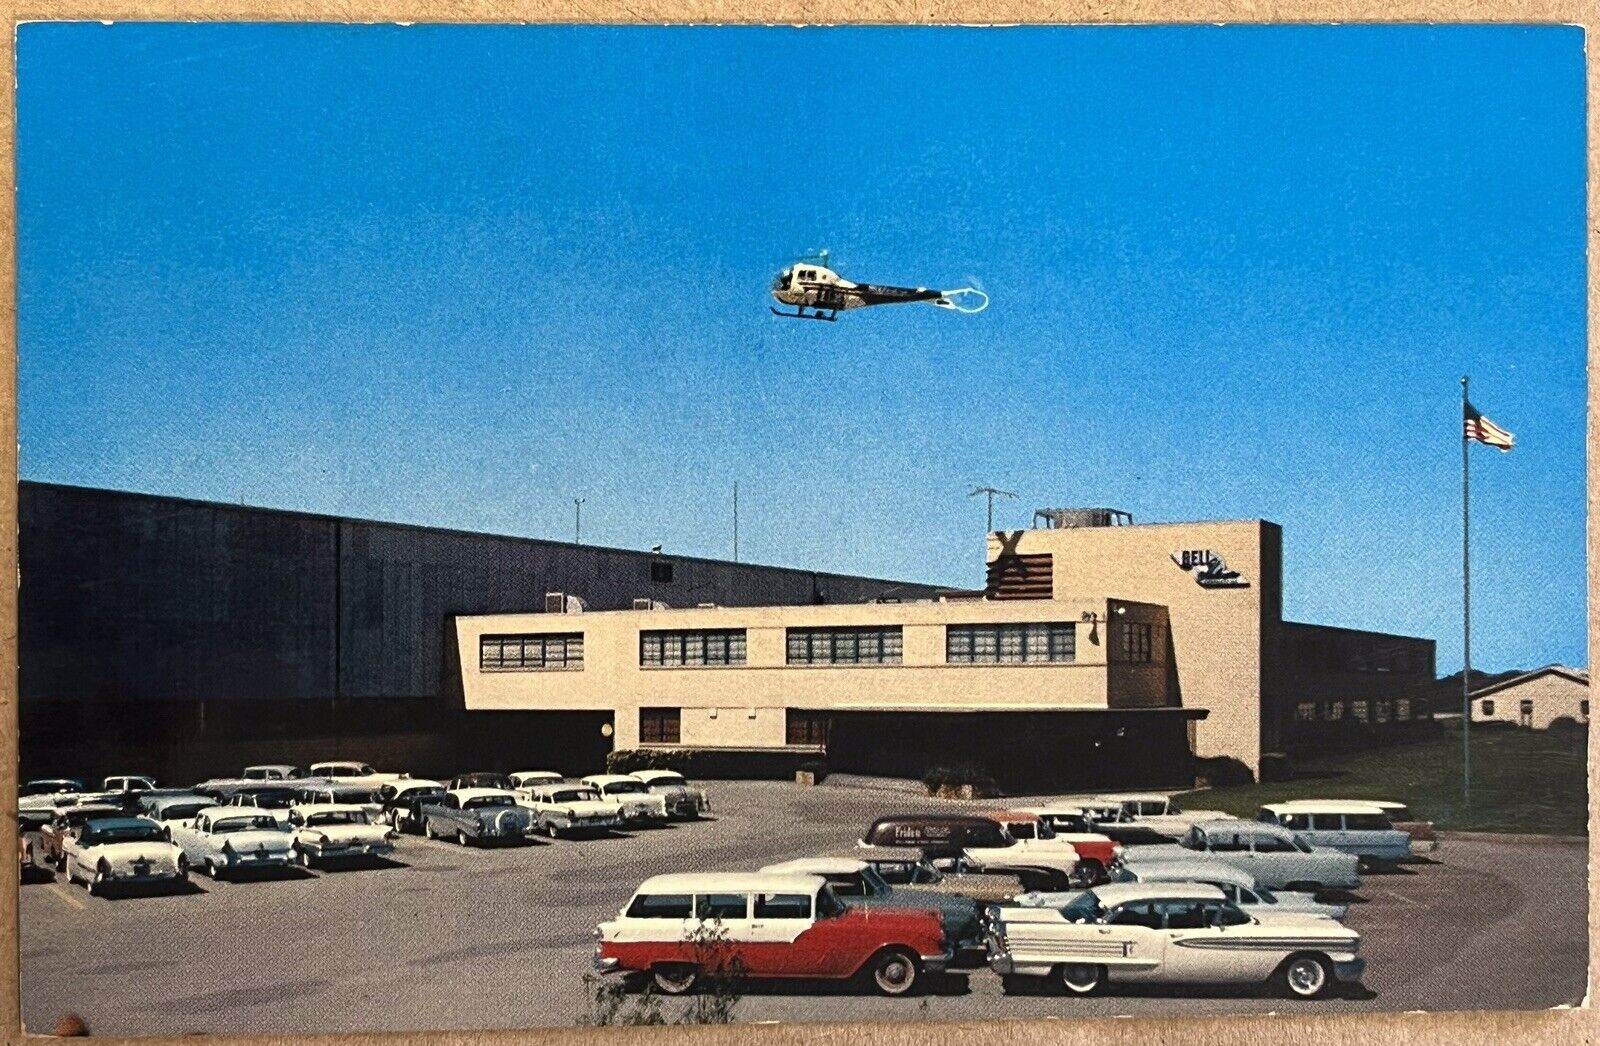 Dallas Fort Worth Bell Helicopter Building Old Cars Texas Vintage Postcard c1960